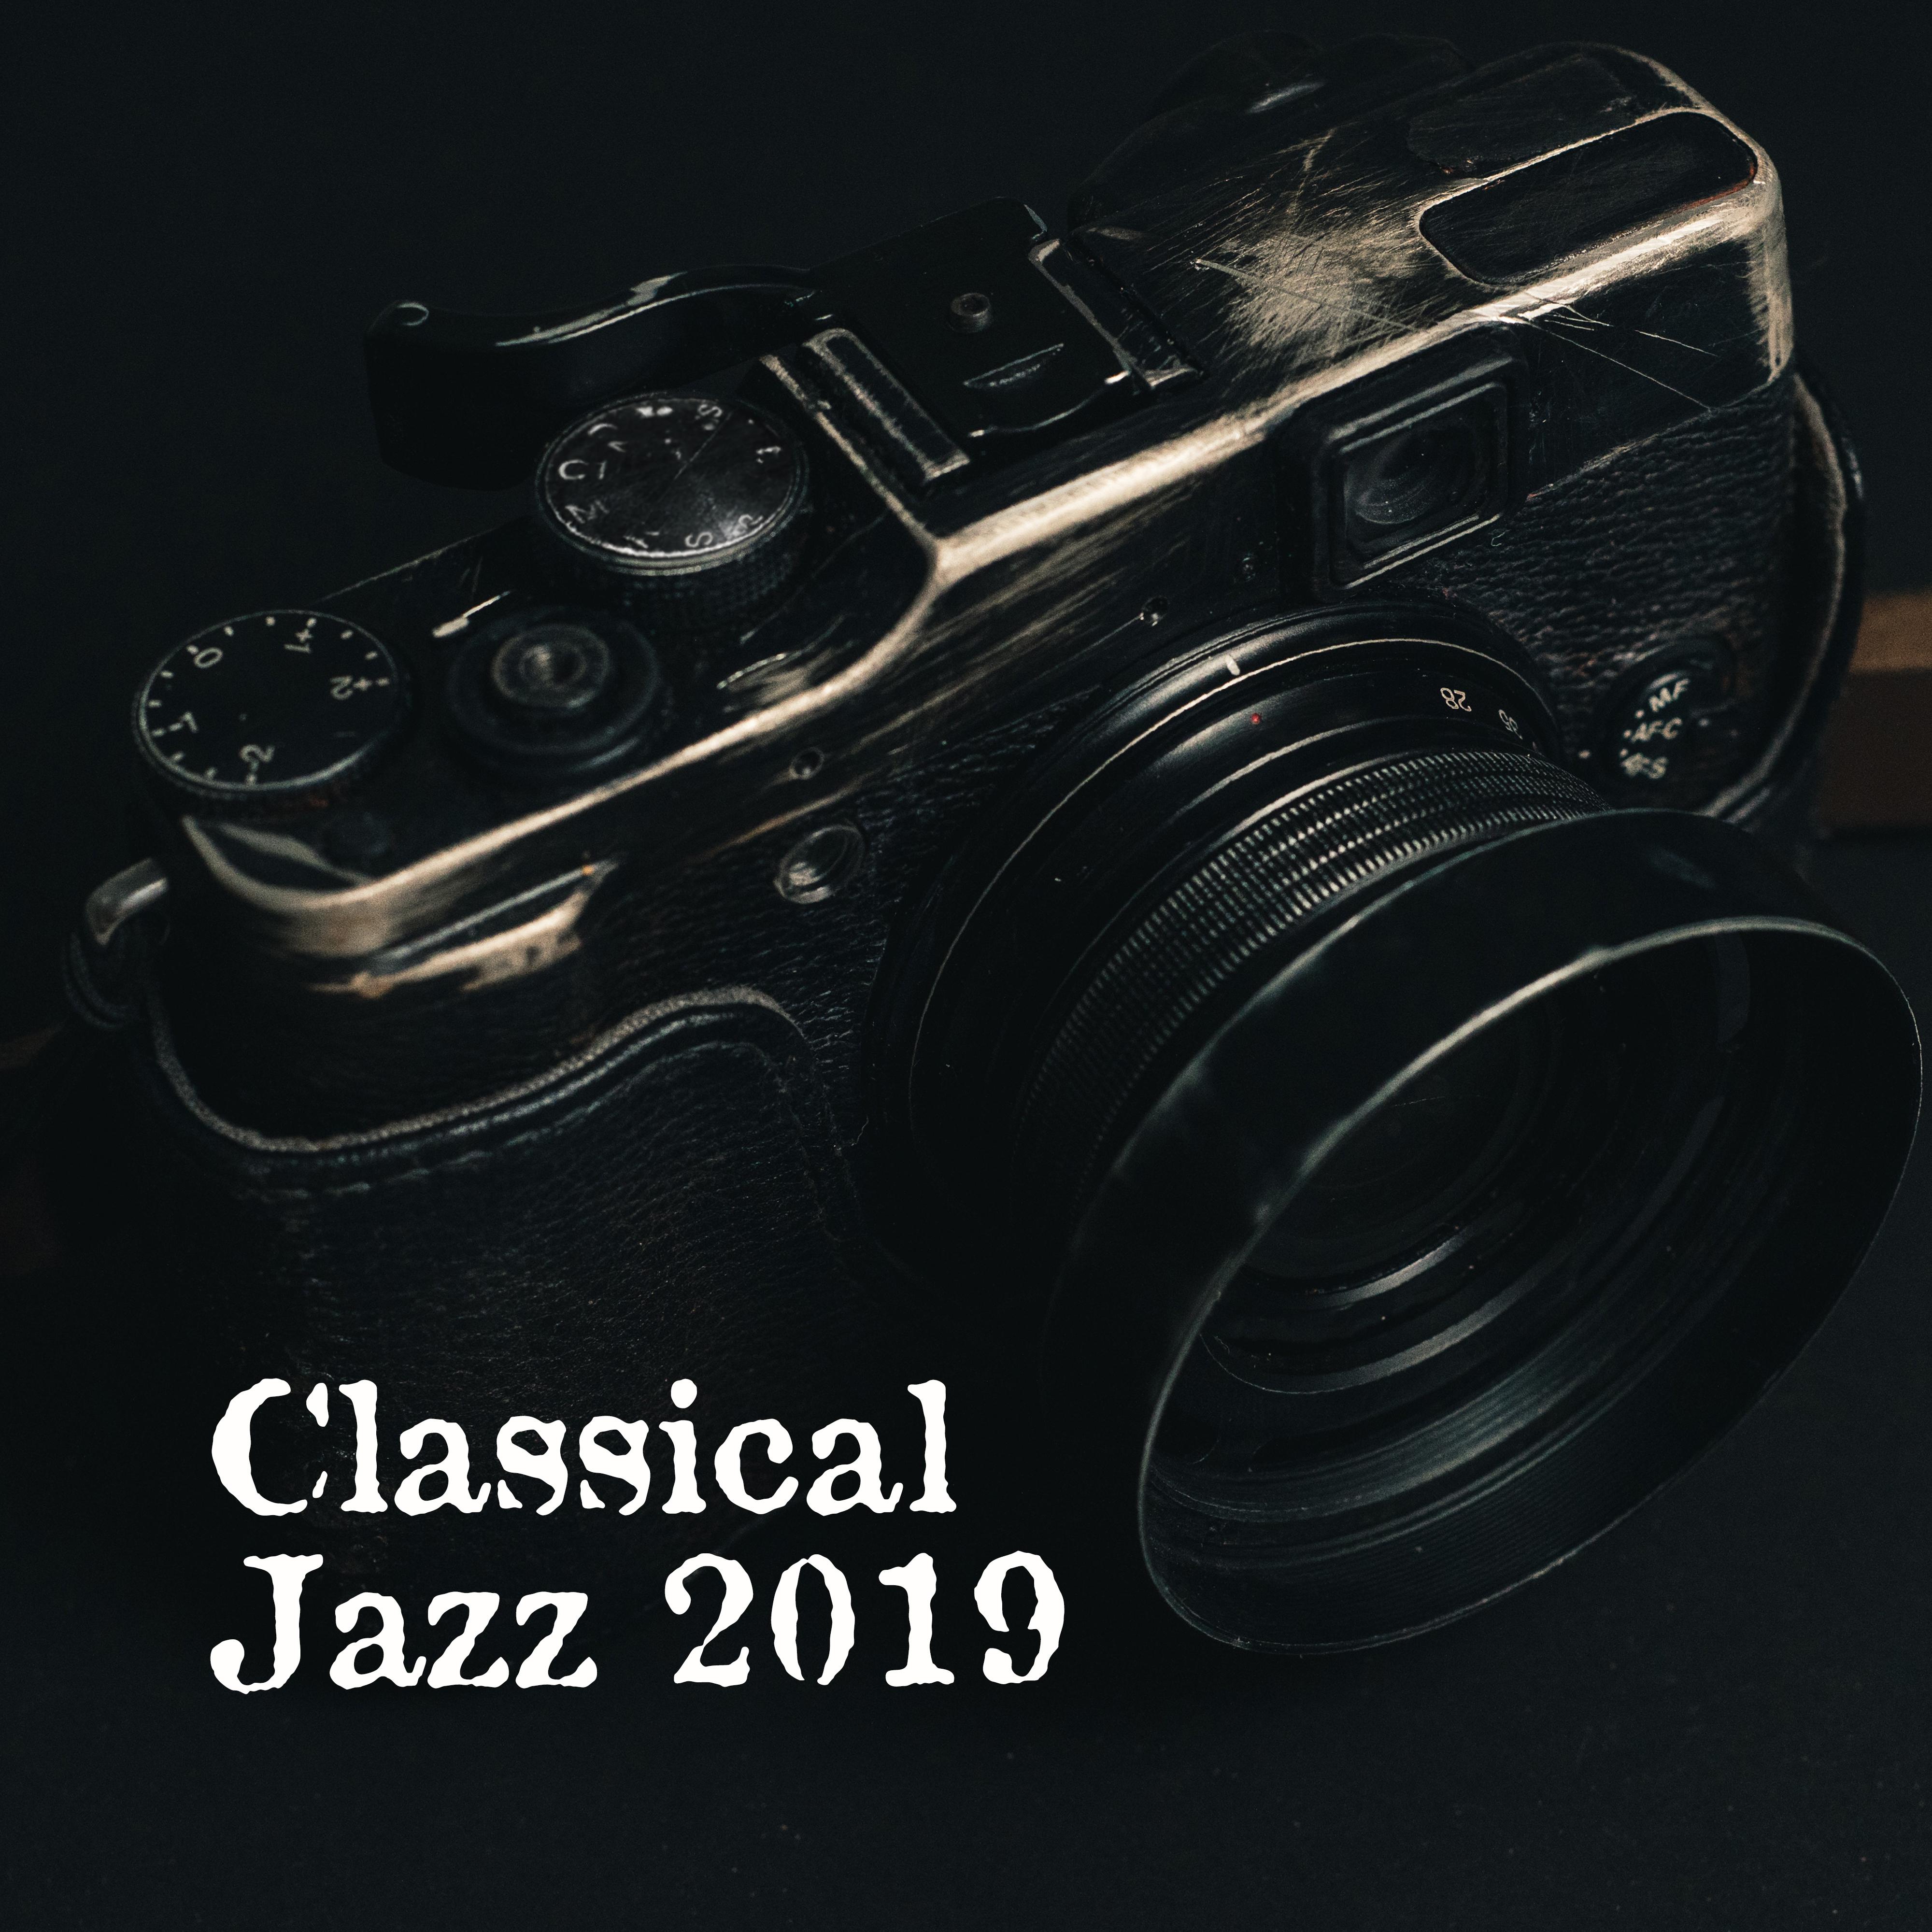 Classical Jazz 2019 – Instrumental Songs for Relaxation, Dance, Cafe Music, Swing Jazz, Smooth Music at Night